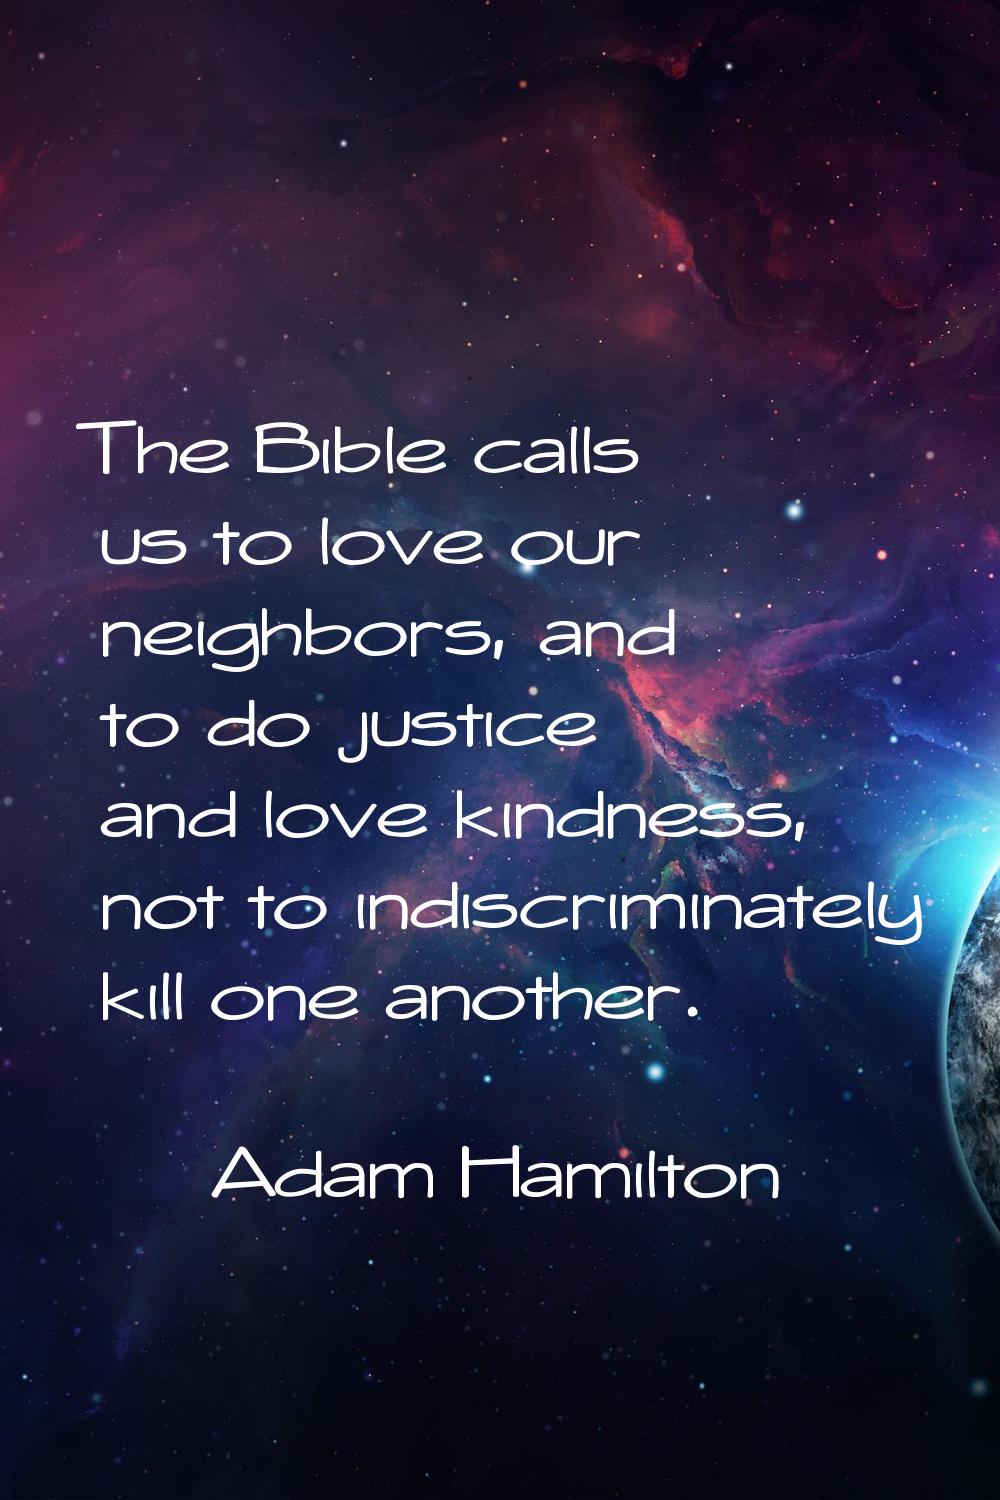 The Bible calls us to love our neighbors, and to do justice and love kindness, not to indiscriminat